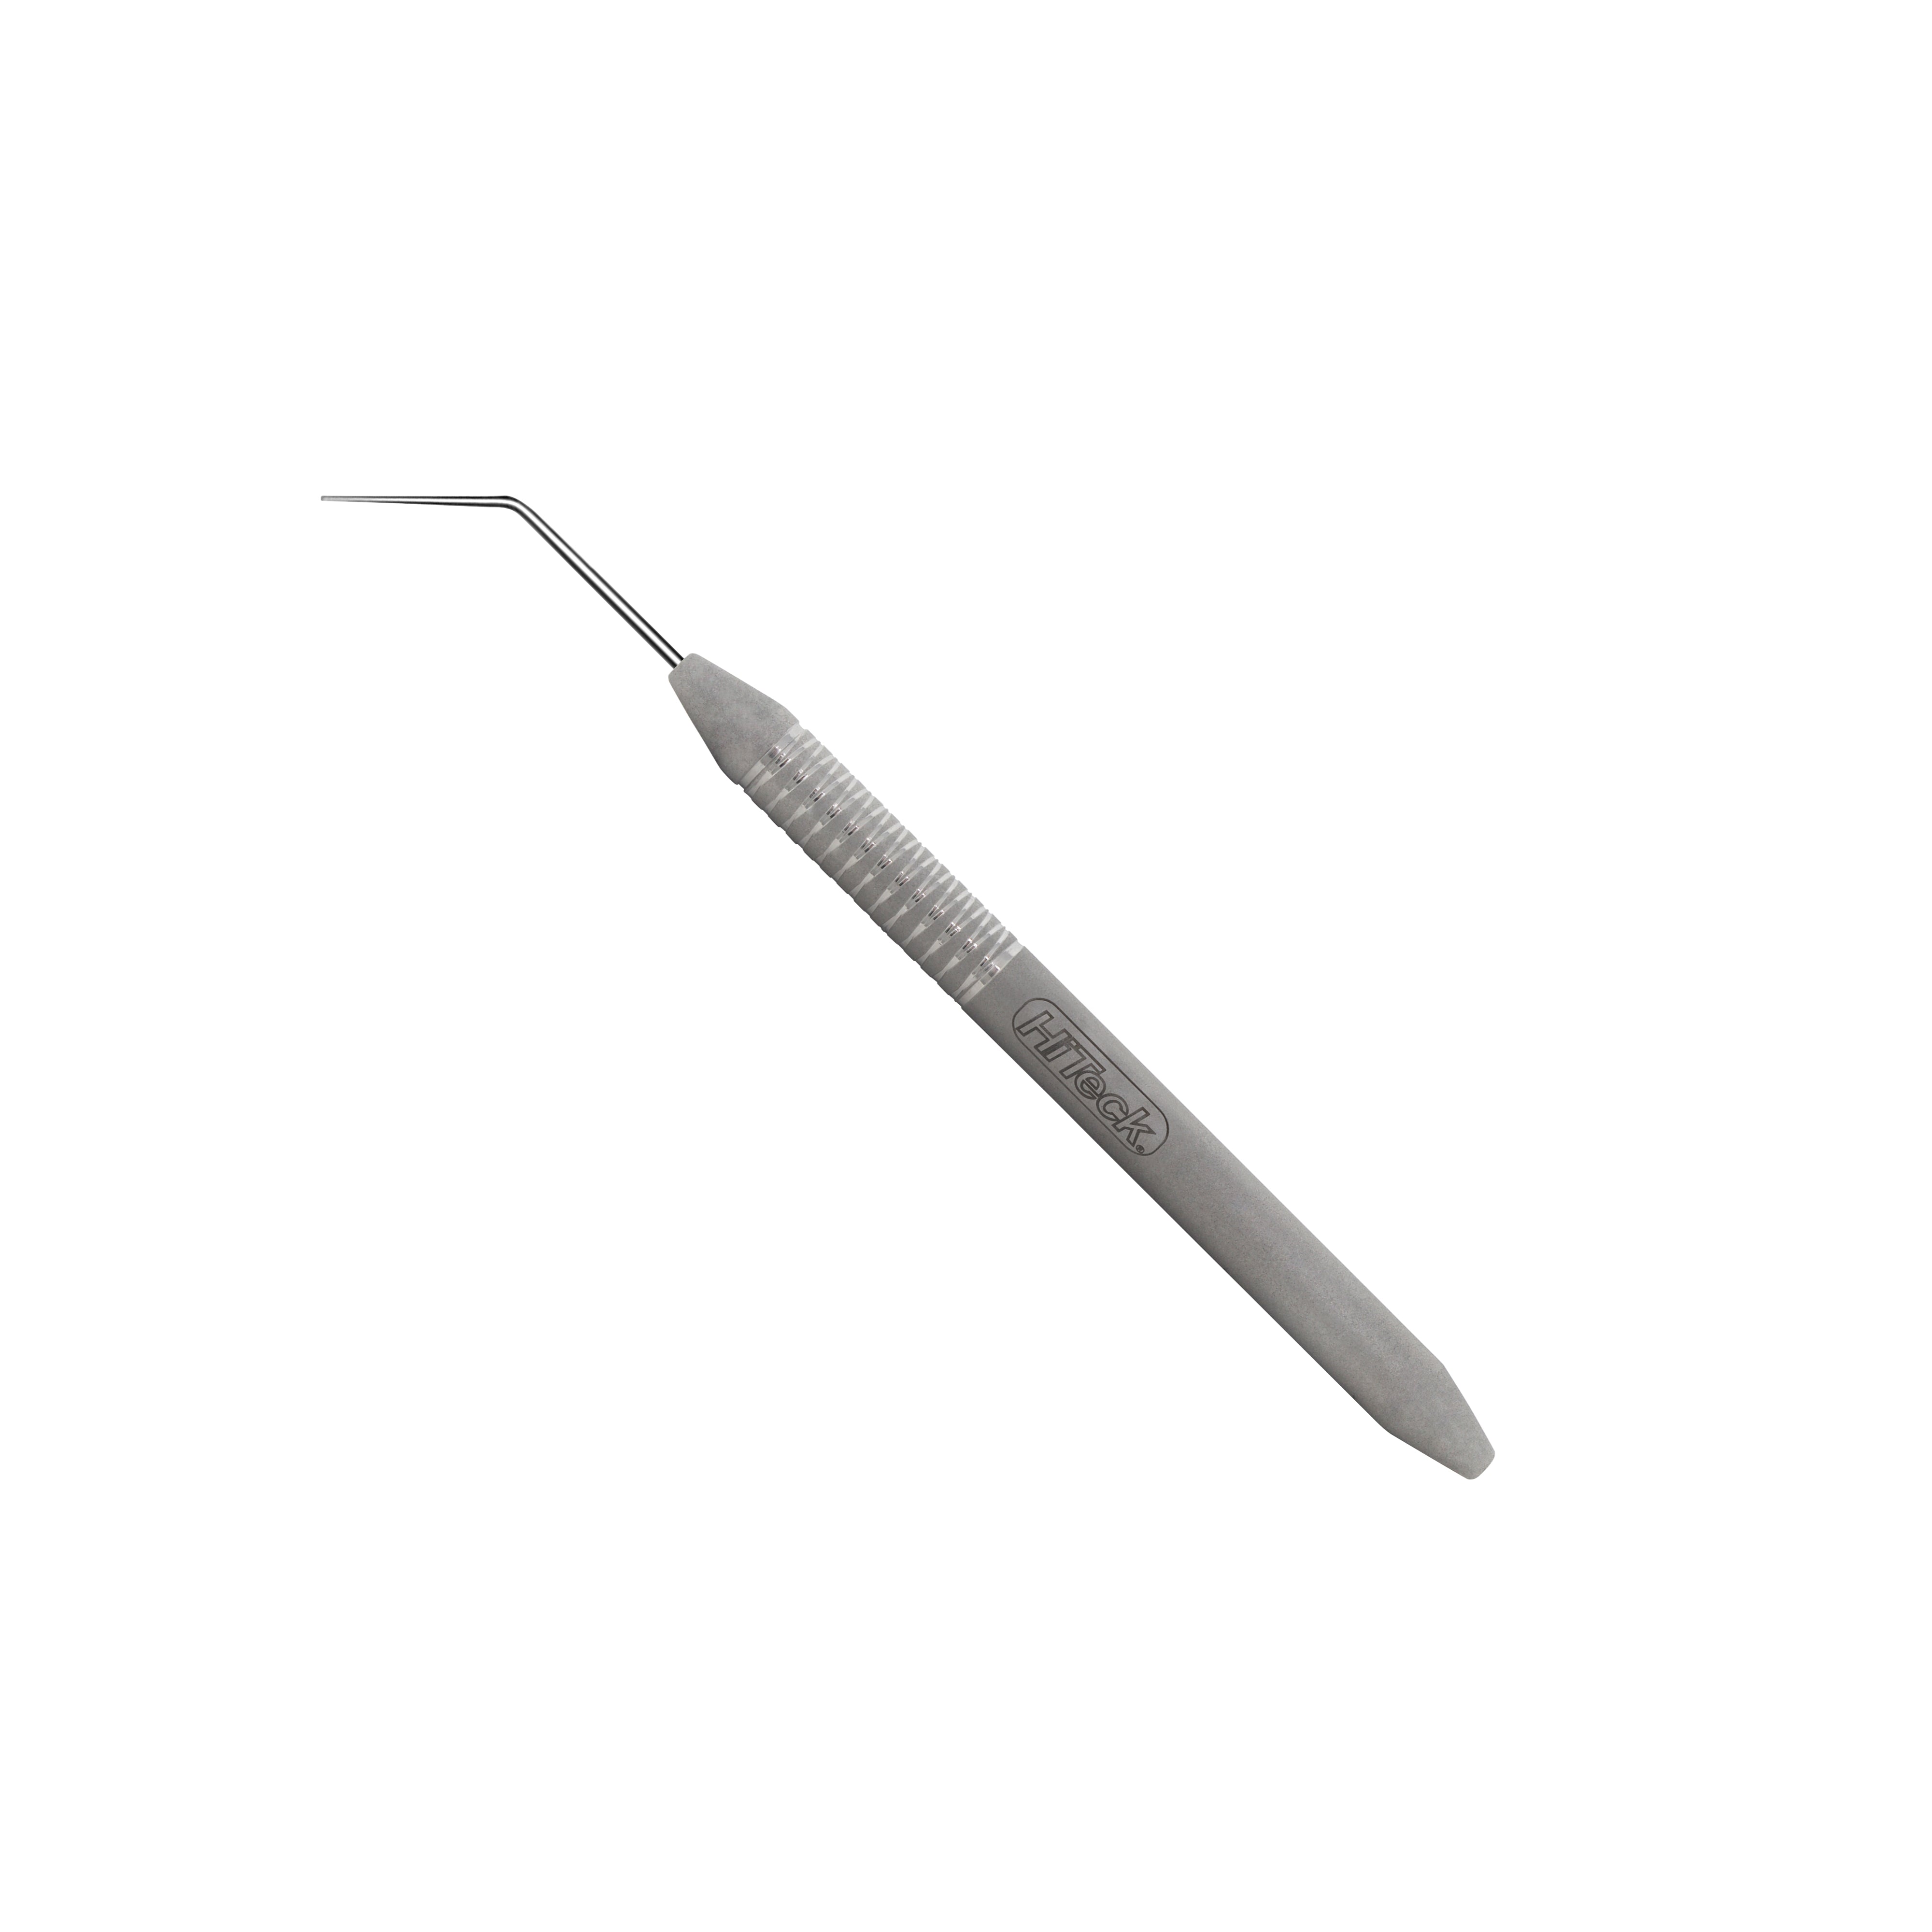 L1, 0.45MM, 18 MM LUKS Root Canal Plugger - HiTeck Medical Instruments